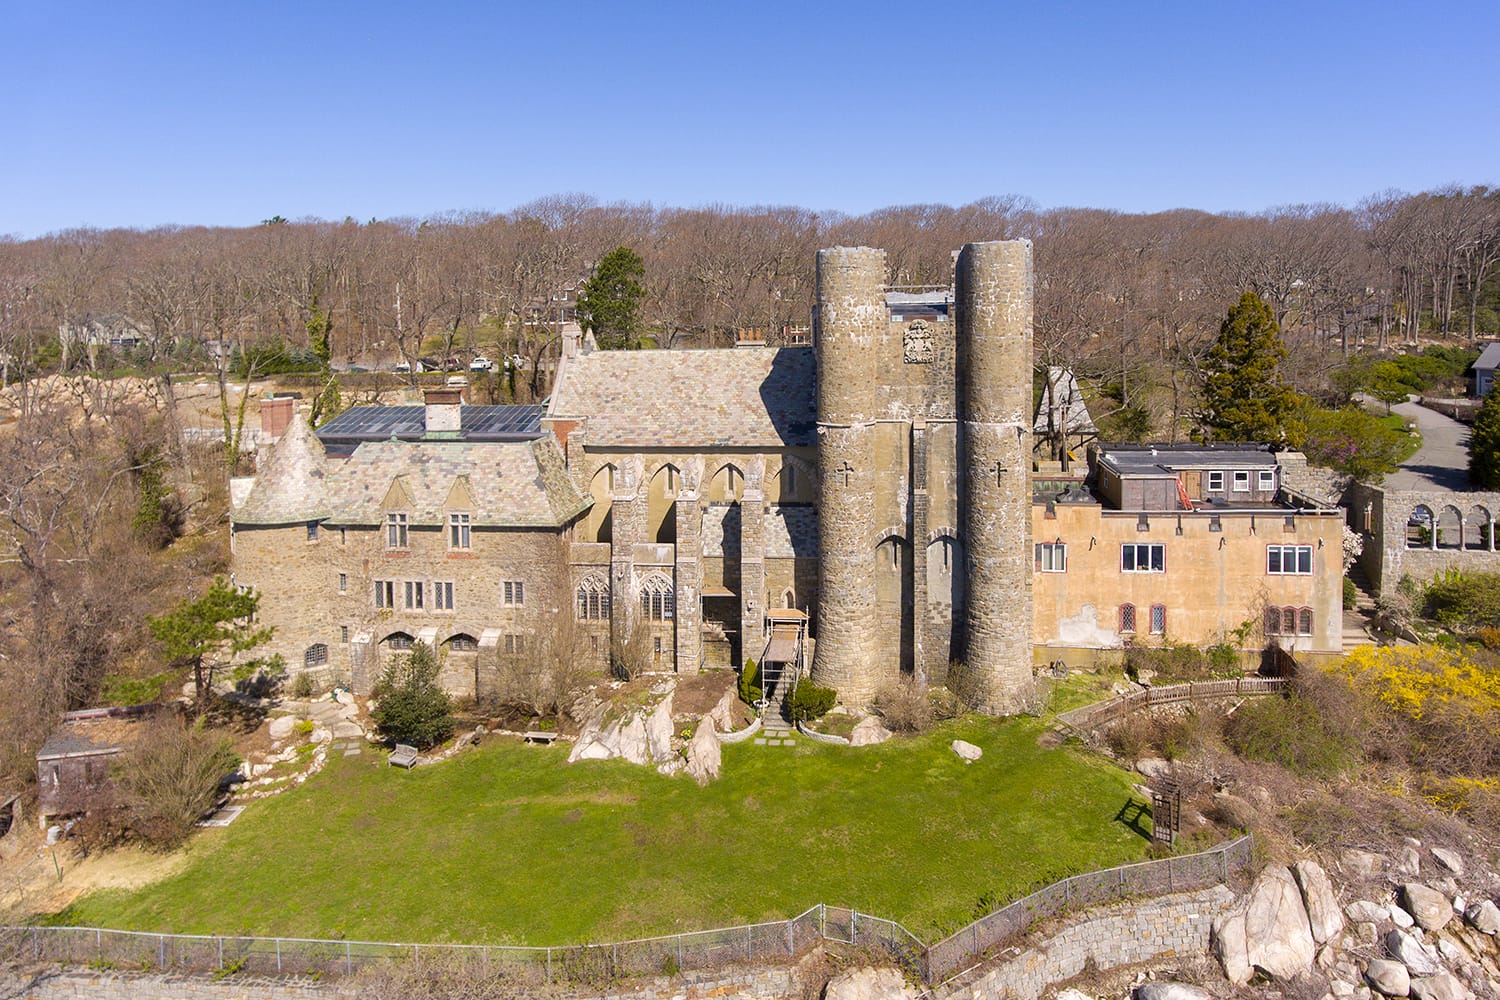 Aerial view of Hammond Castle in village of Magnolia in city of Gloucester, Massachusetts, USA